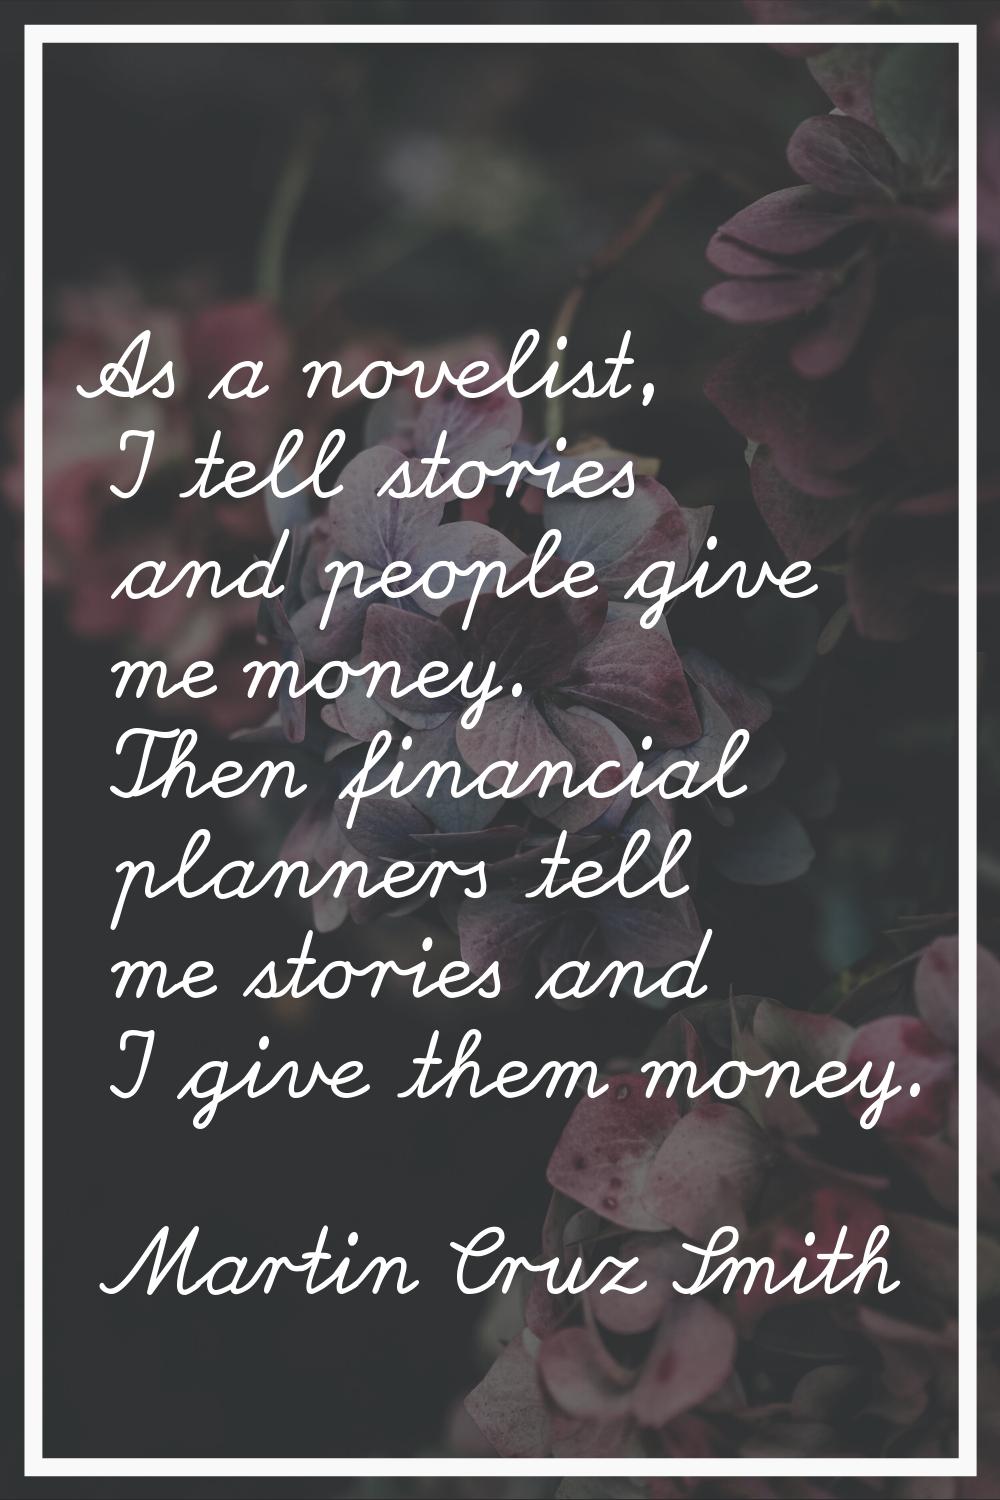 As a novelist, I tell stories and people give me money. Then financial planners tell me stories and